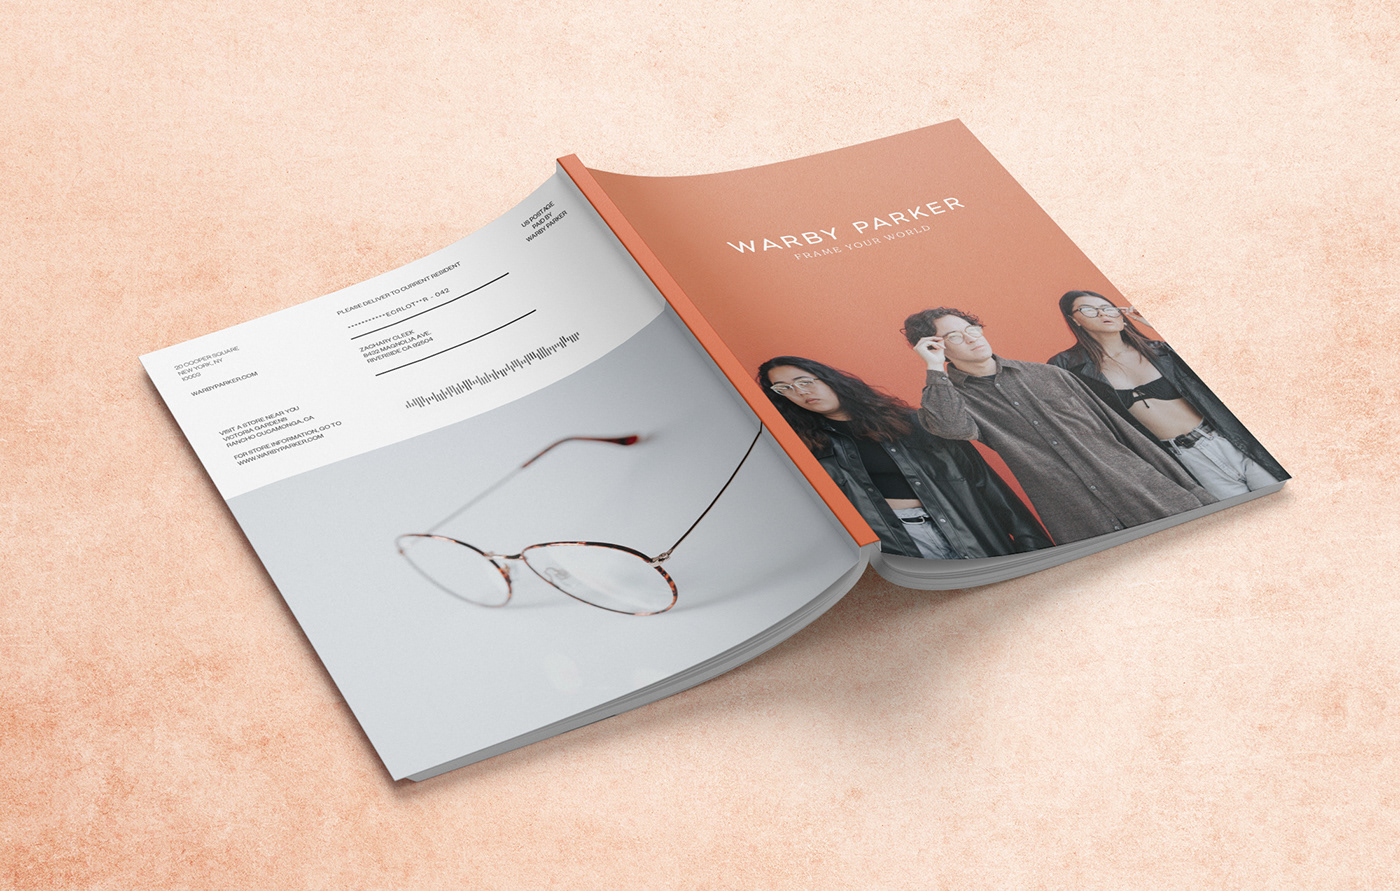 Advertising  catalog Fashion  glasses graphic design  marketing   warby parker